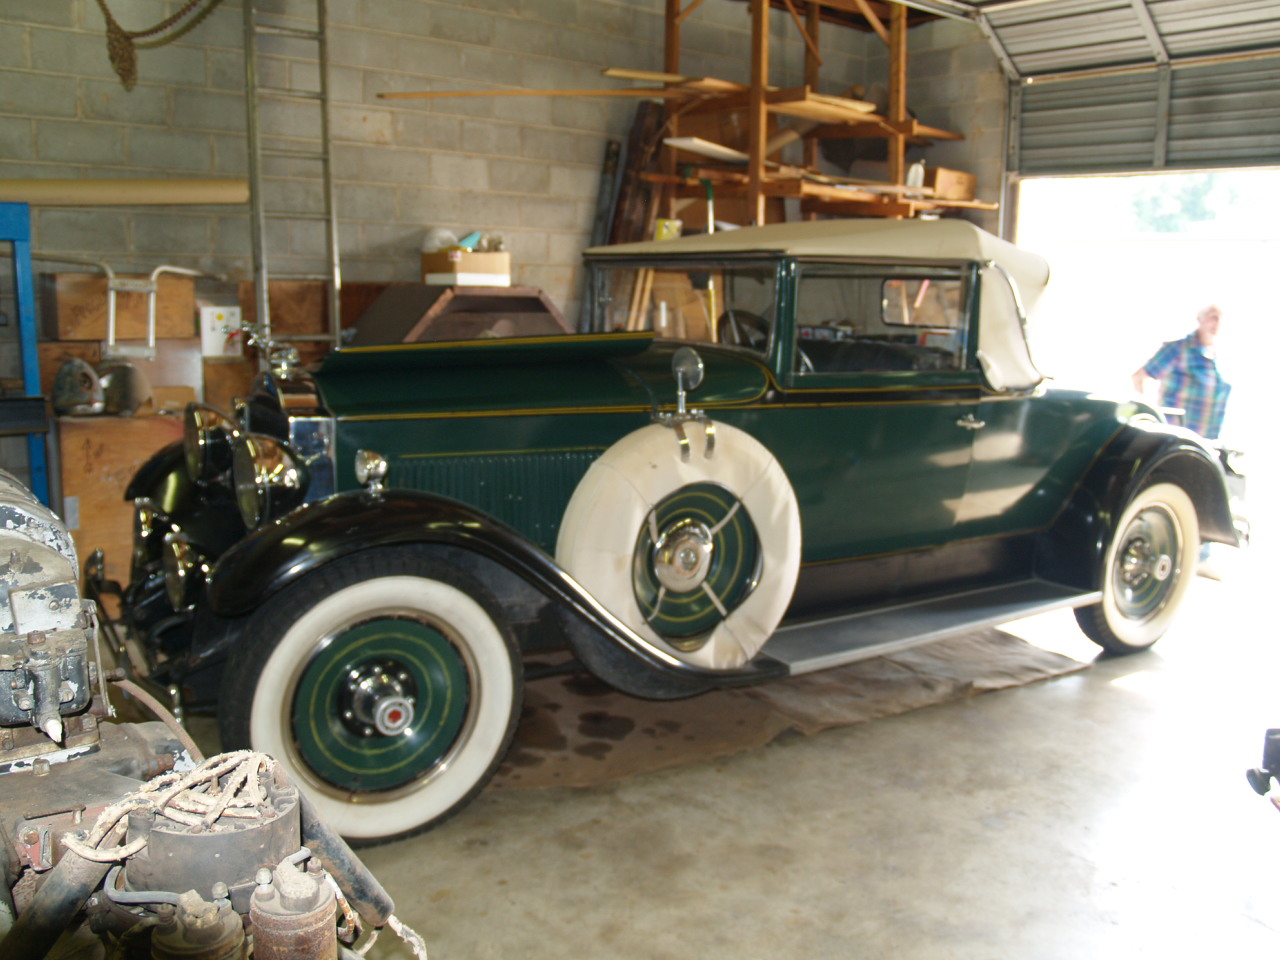 Purchased 1930 Packard Convertible Coupe with rumble seat